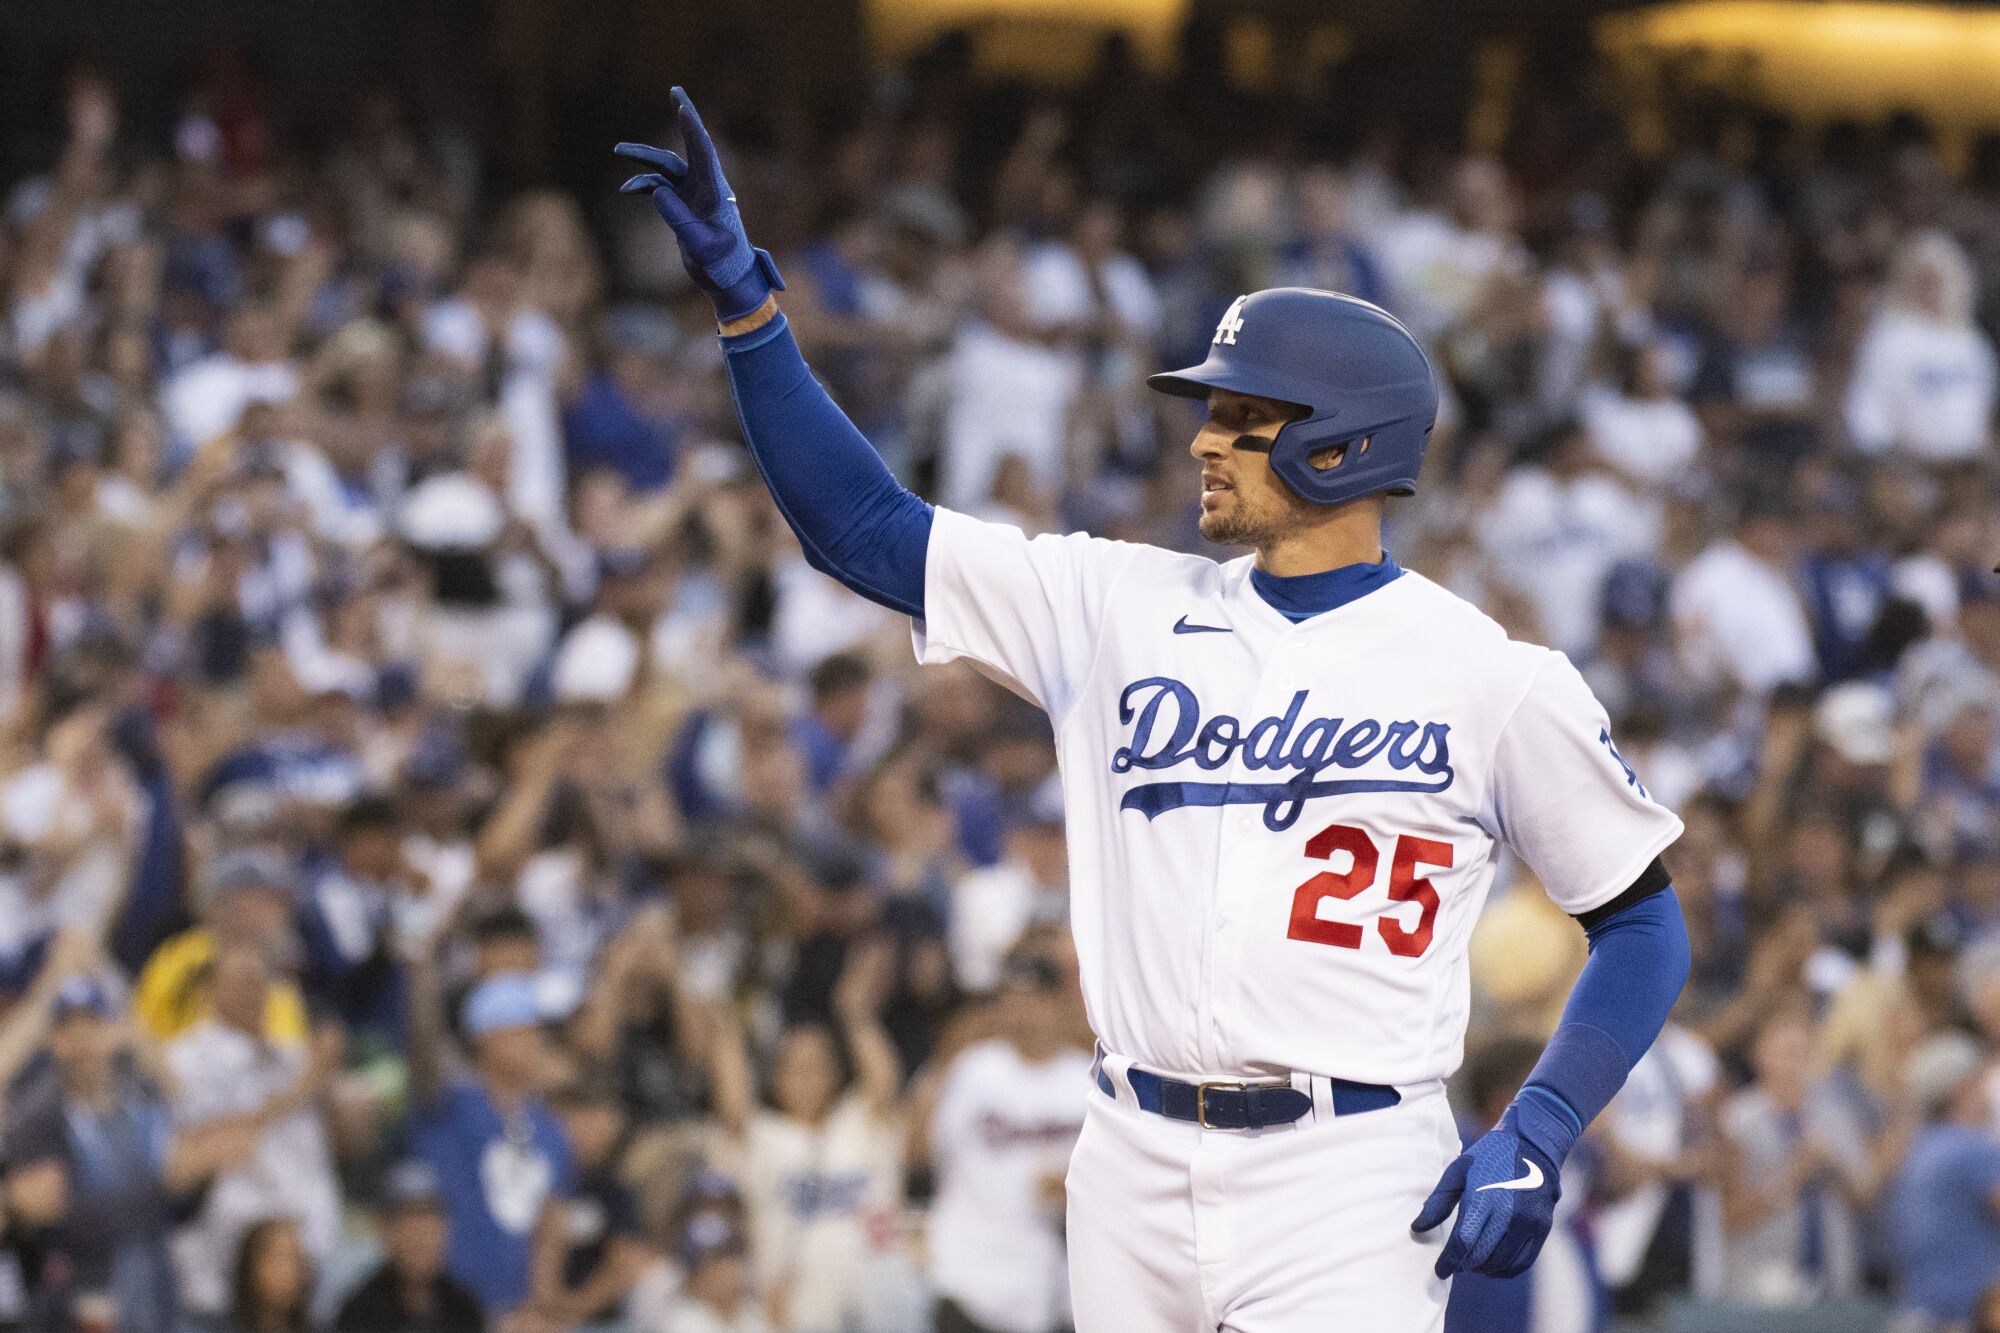 Dodgers' Trayce Thompson gestures toward the stands after hitting a three-run home run